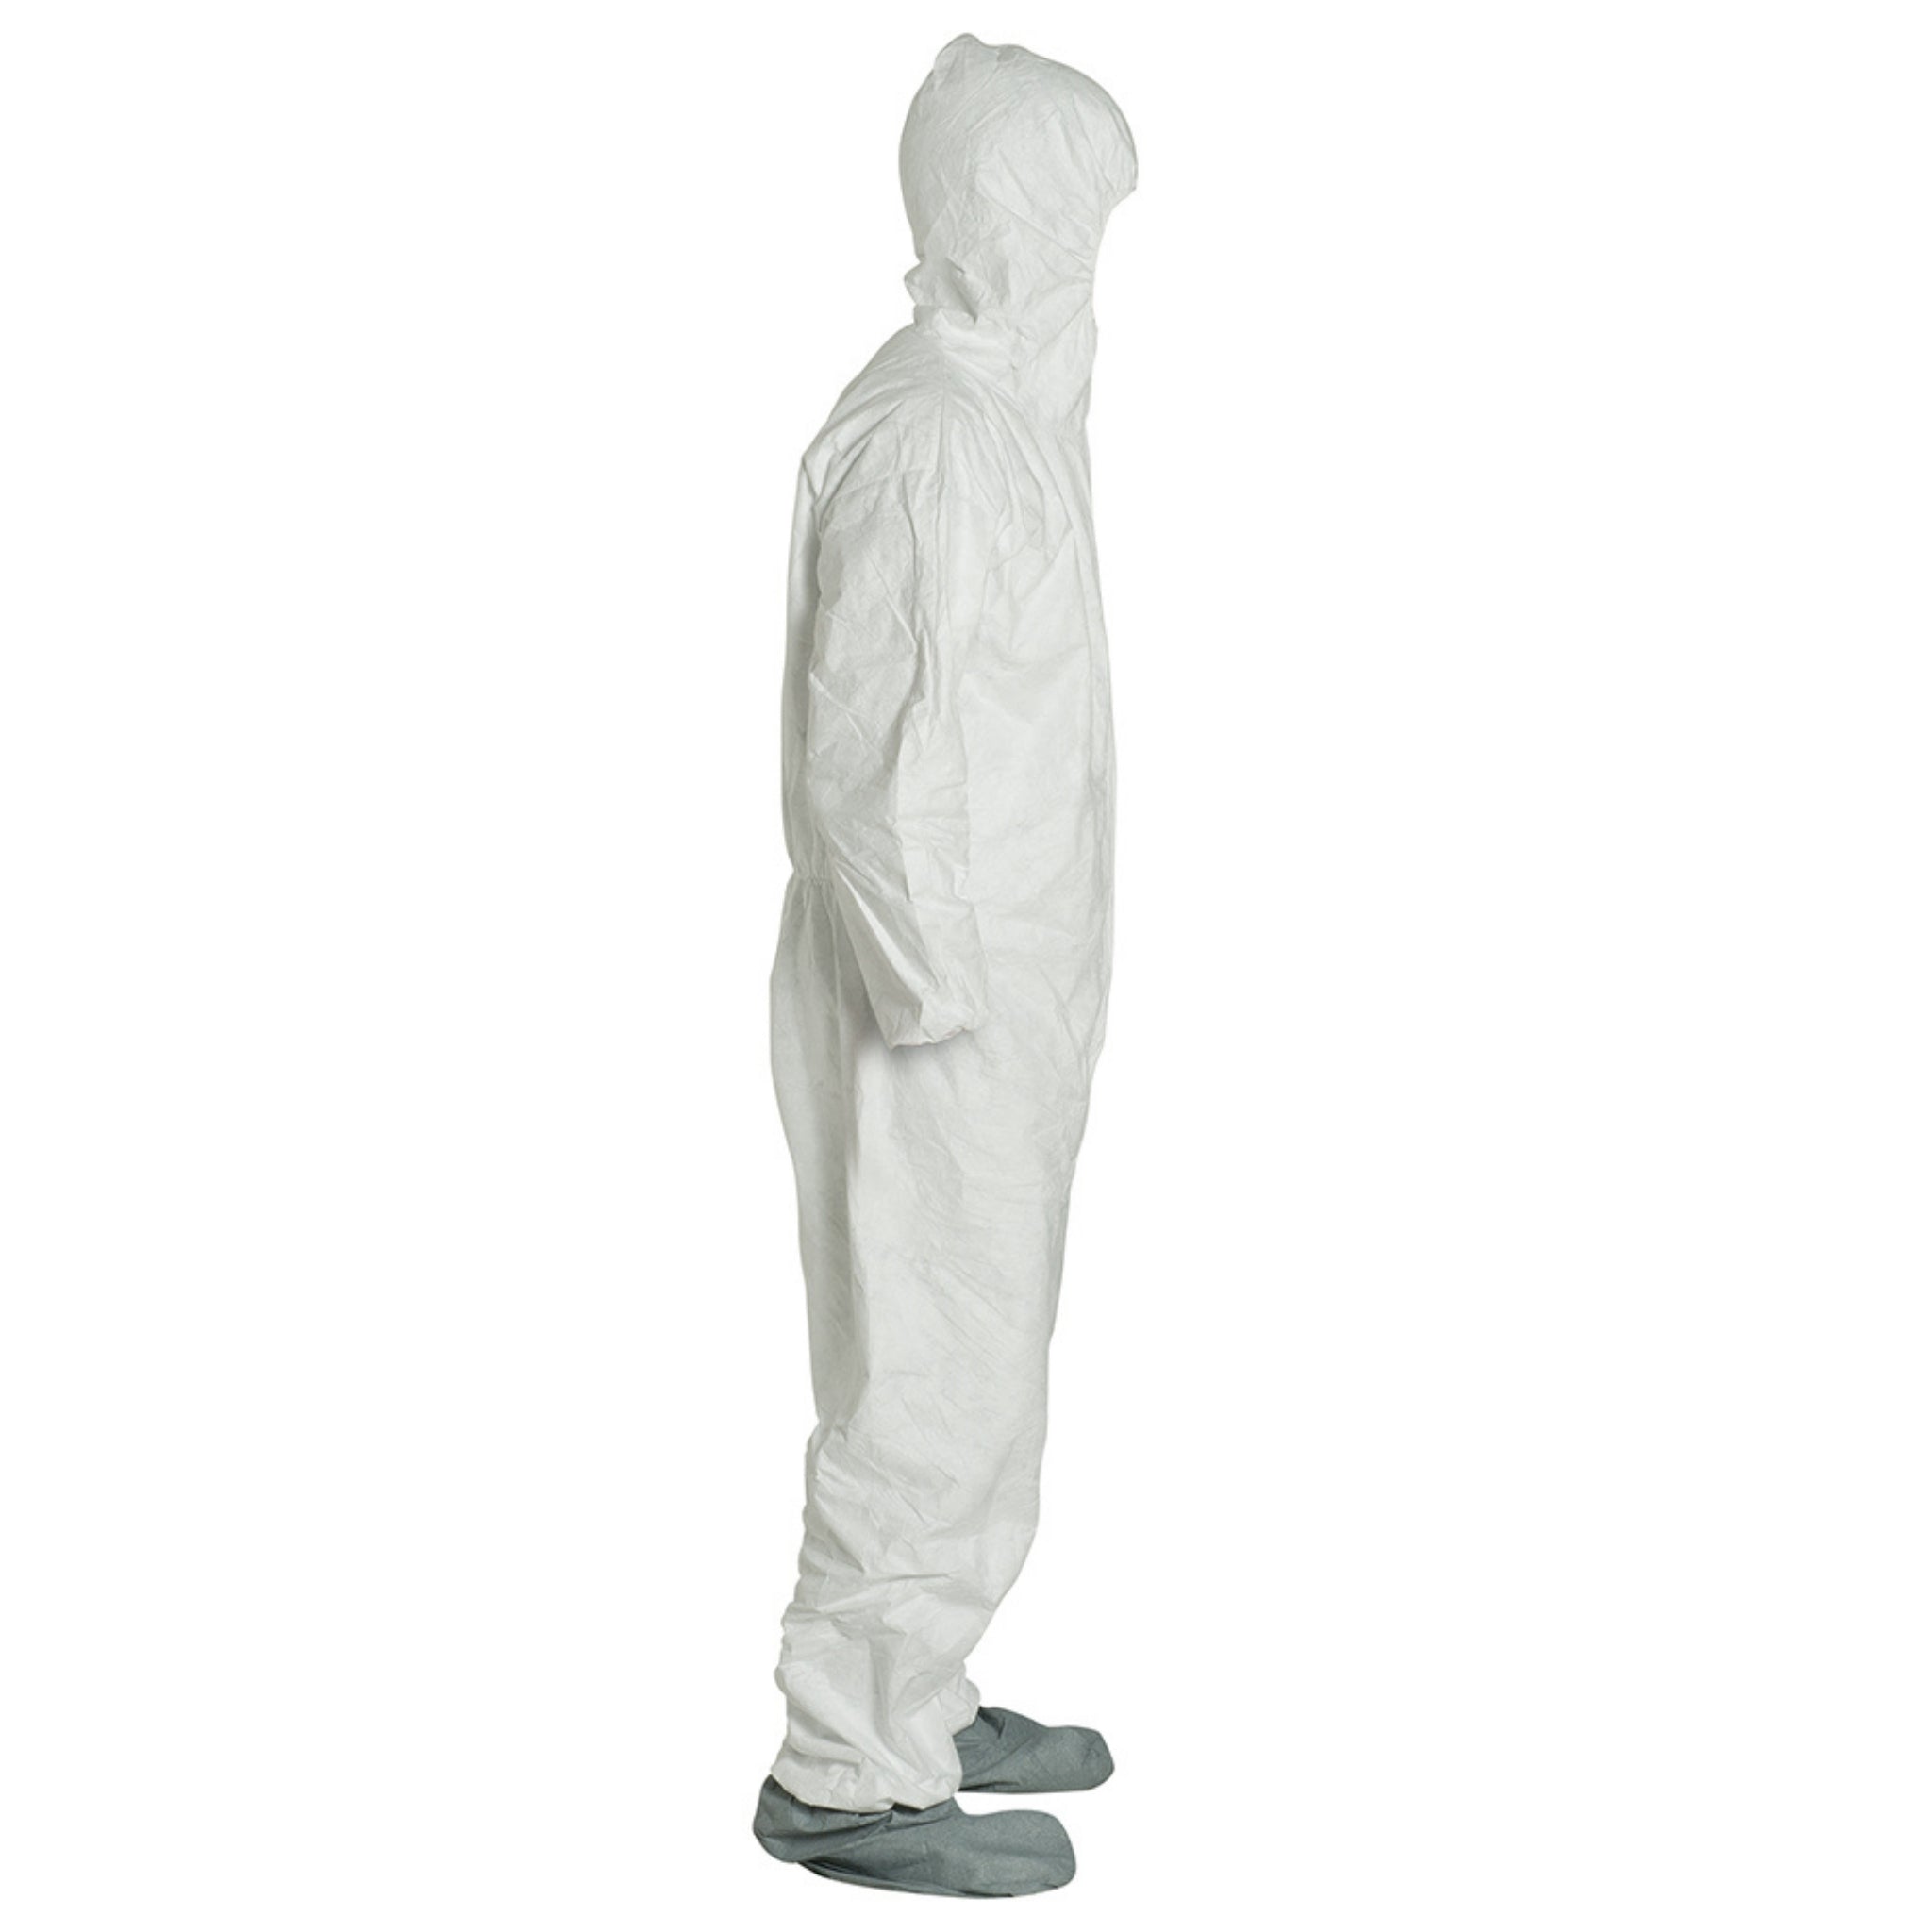 DuPont TY122S- Case of 25: Tyvek 400 Disposable Protective Coverall, White